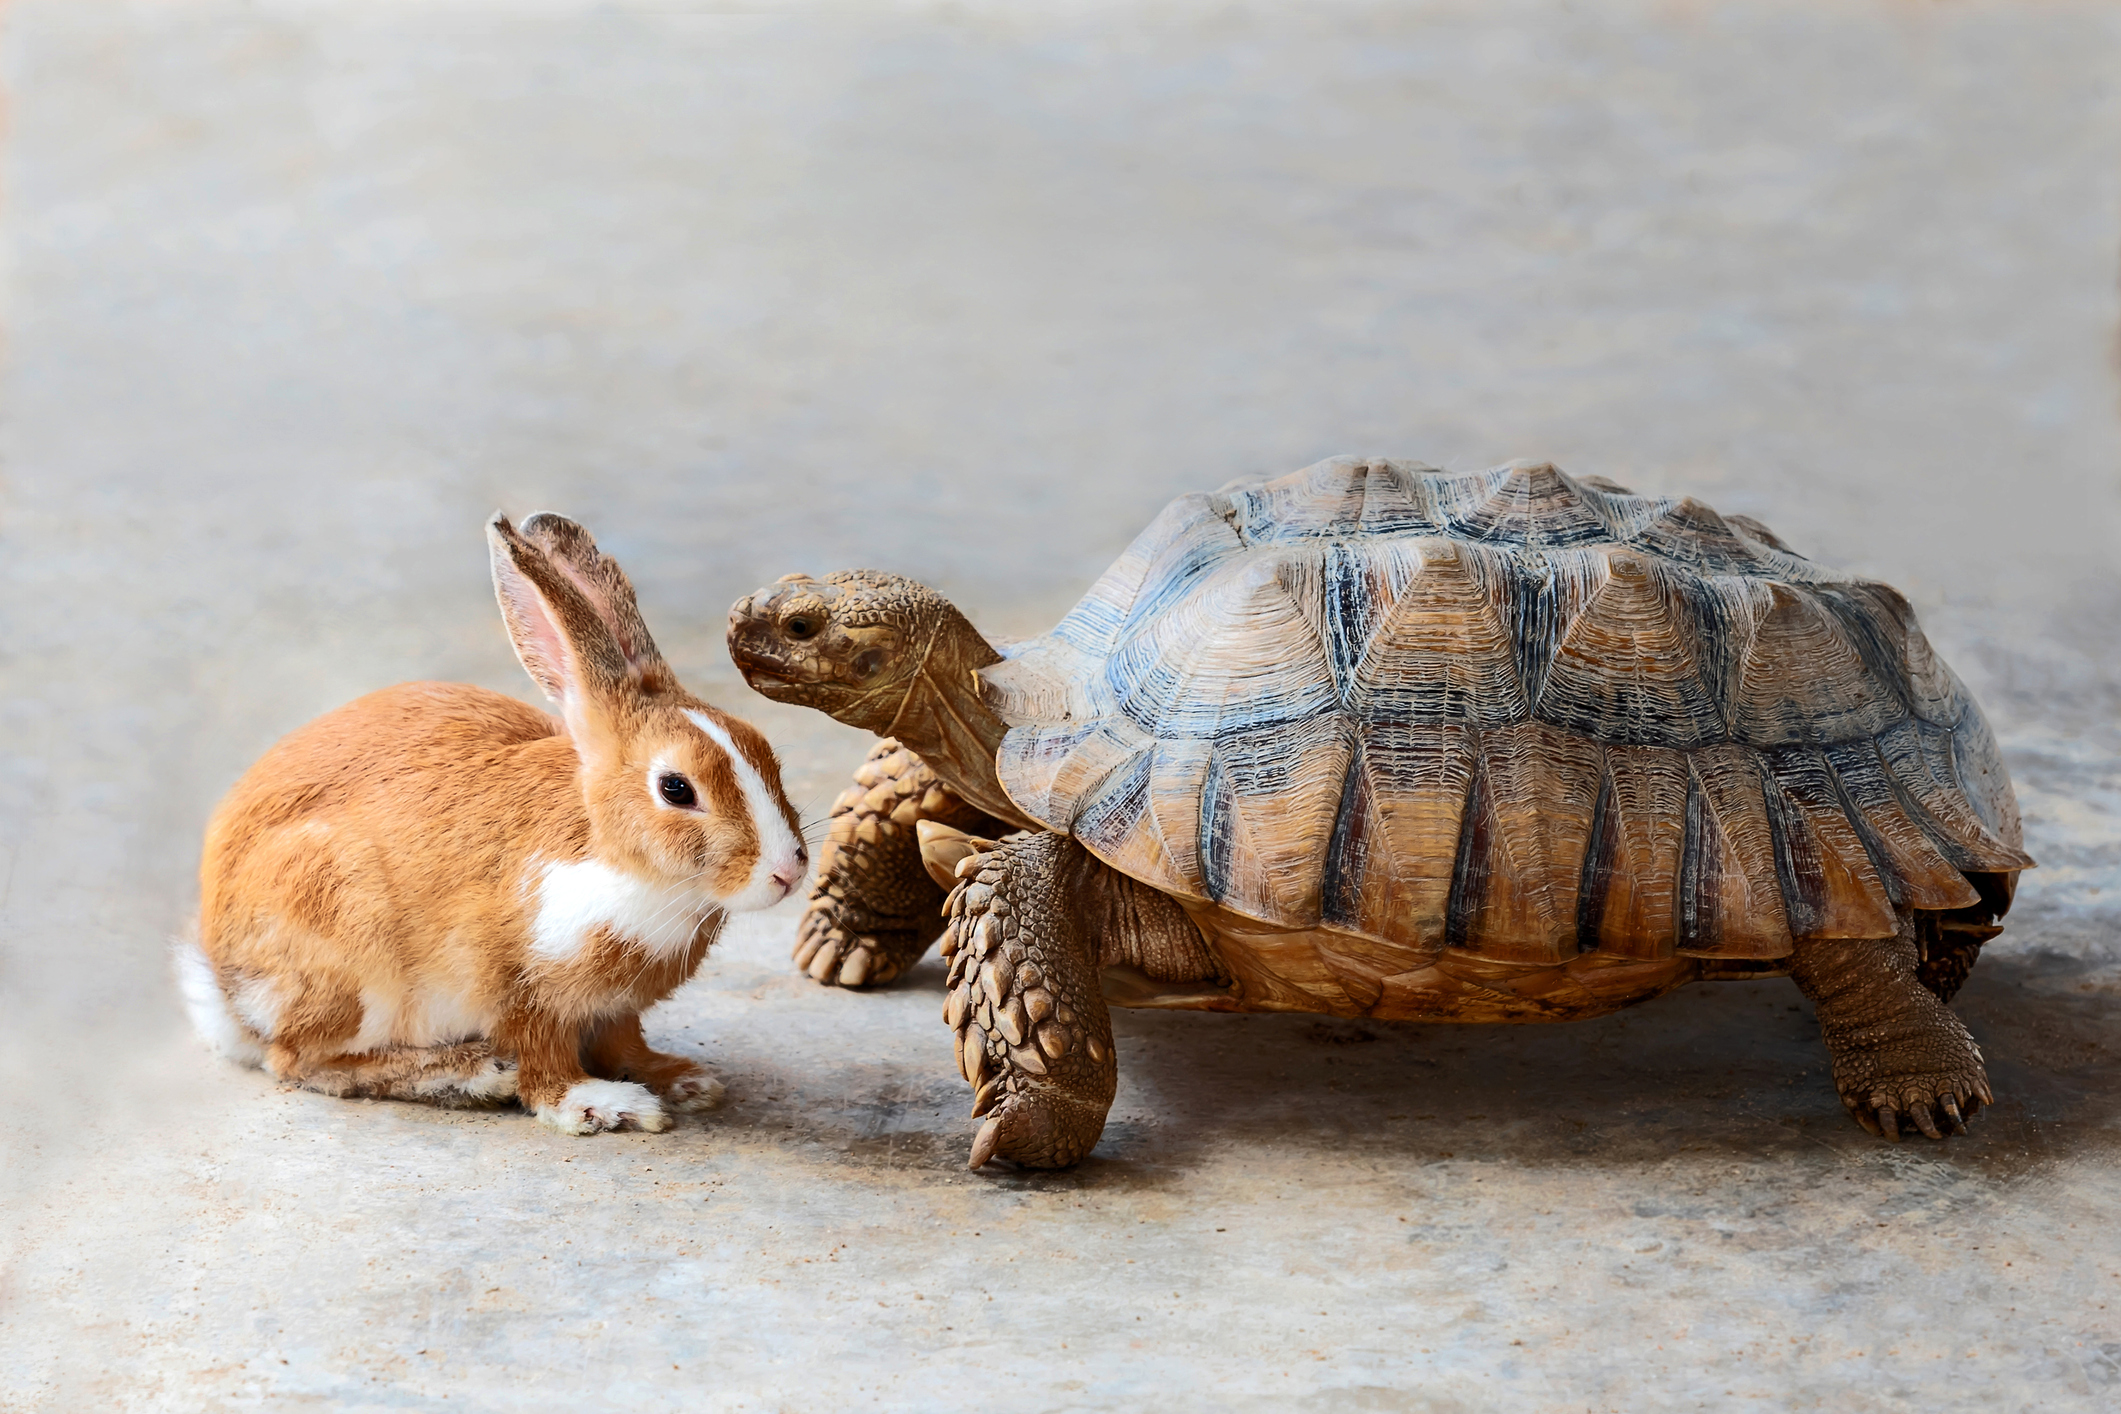 Rabbit and turtle standing next to each other.